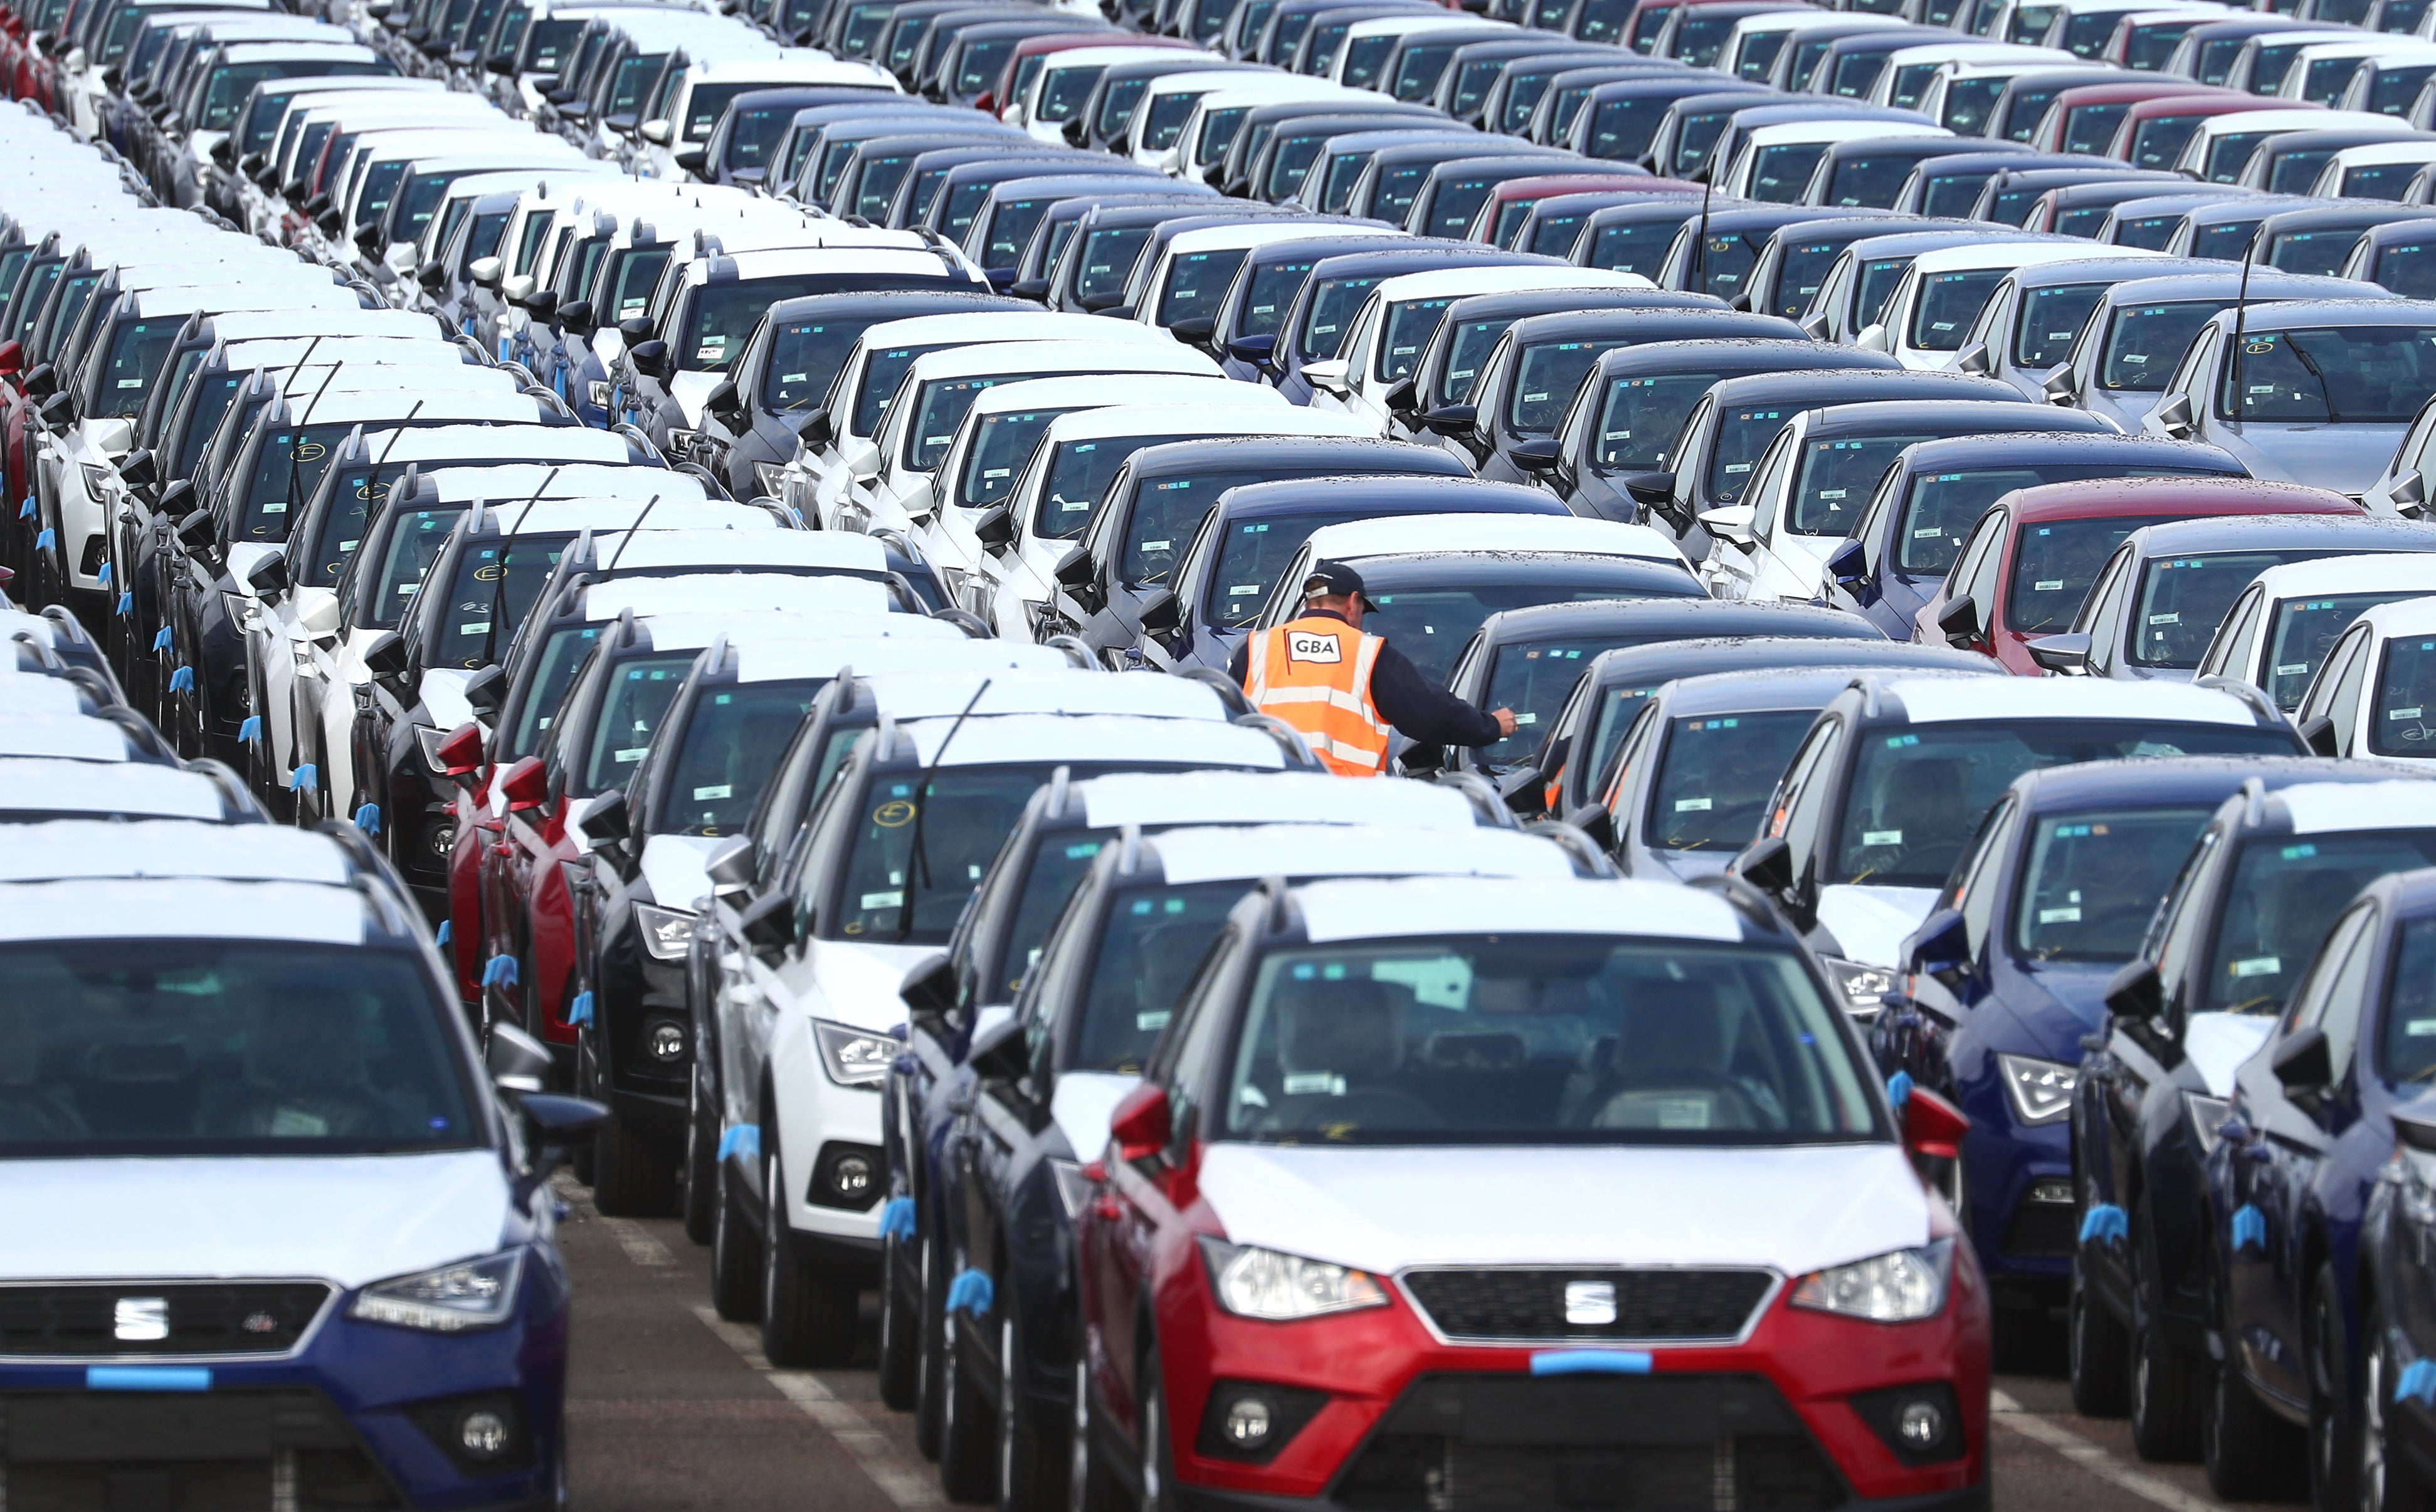 New cars sit at a dockside in Sheerness, Kent